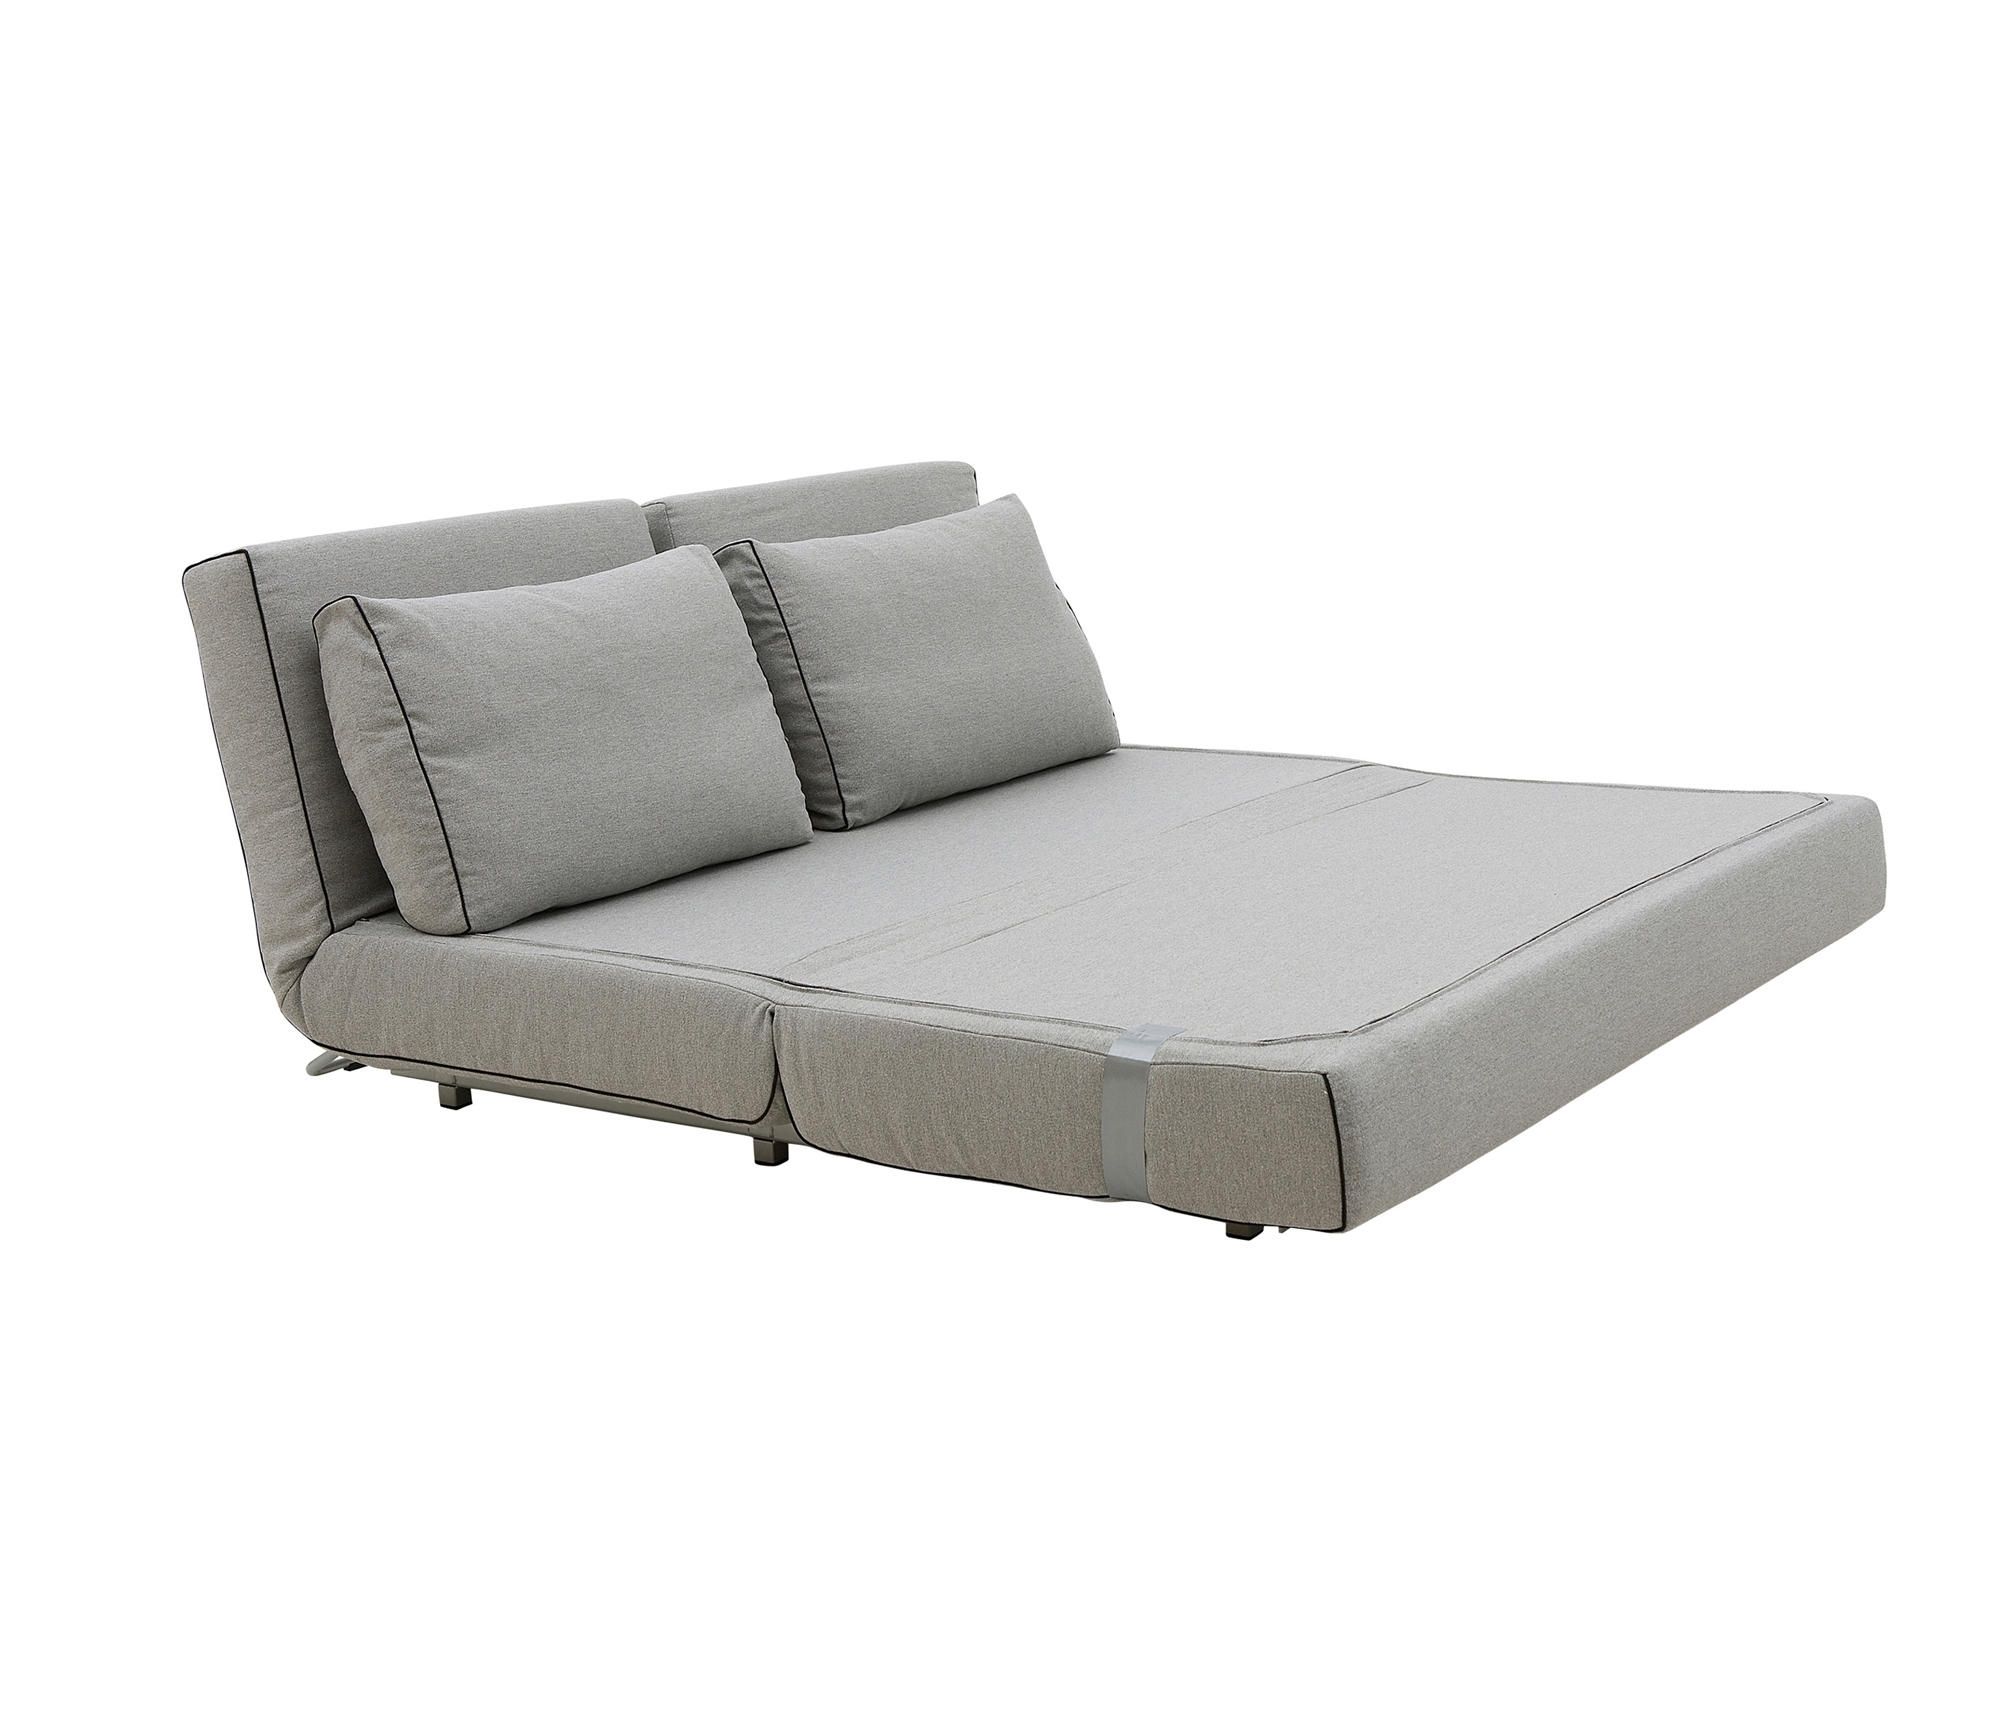 Architonic Pertaining To City Sofa Beds (View 1 of 20)